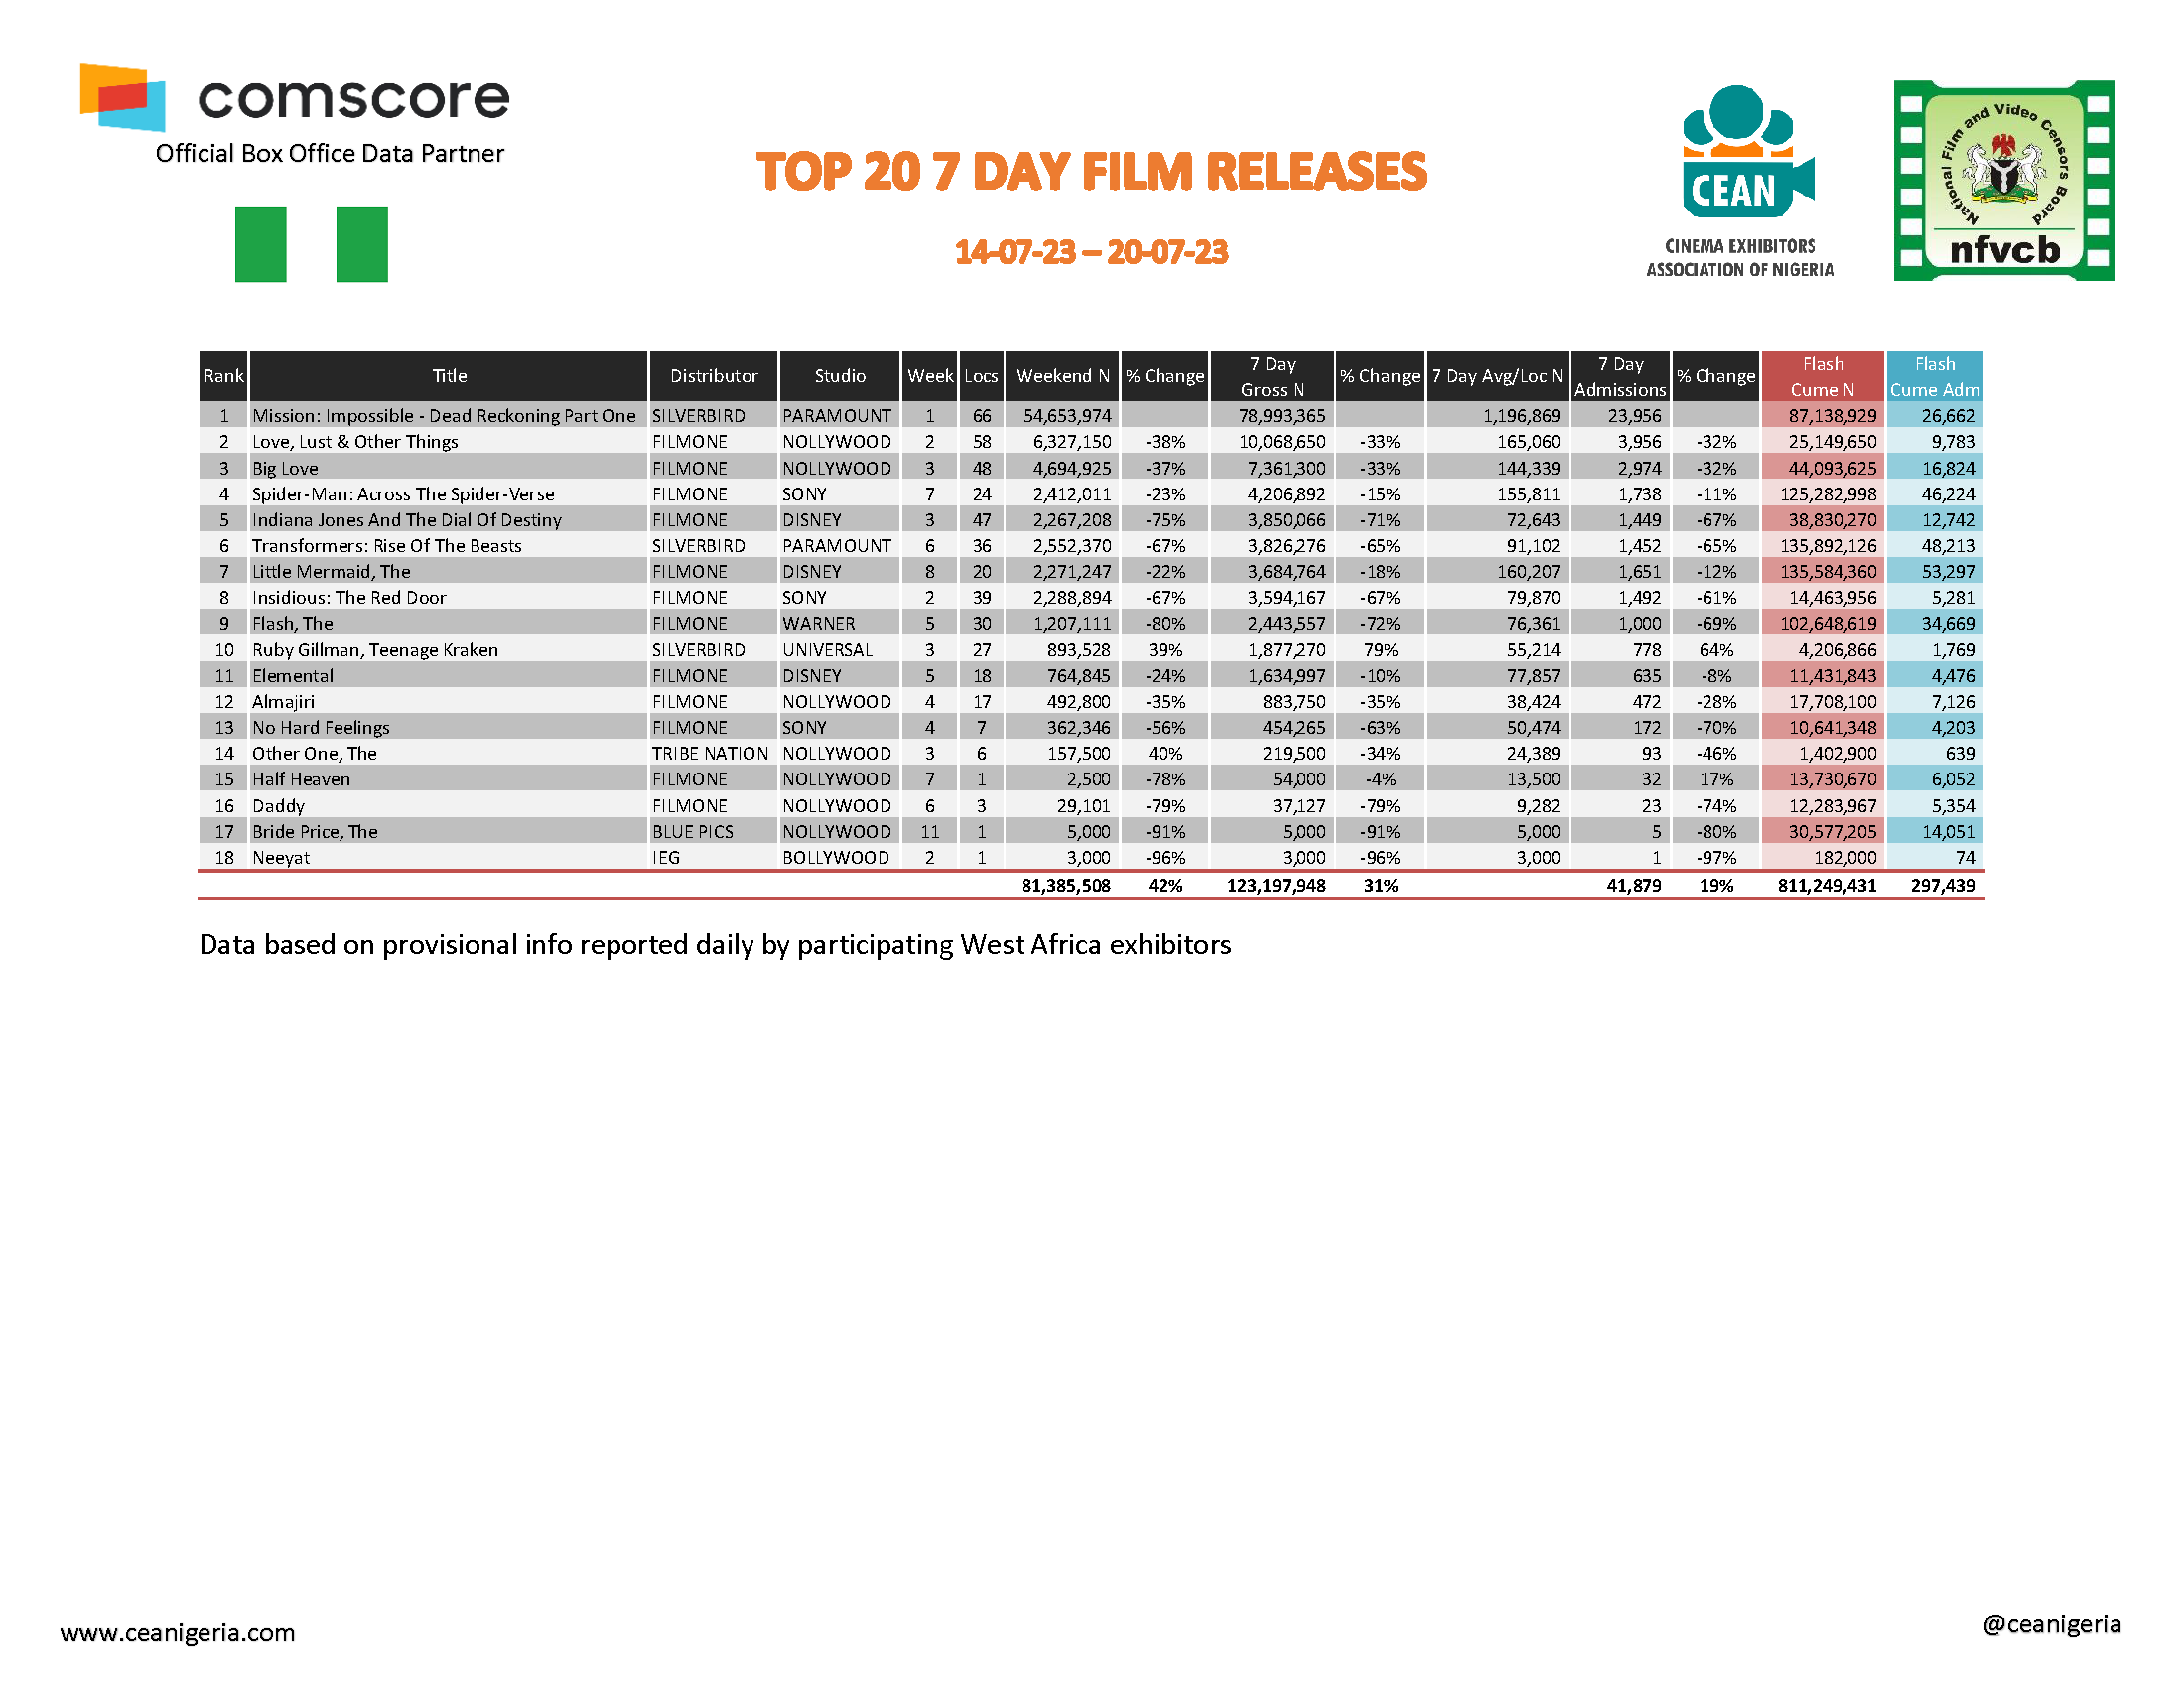 Top 20 films 7 Day 14th 20th July